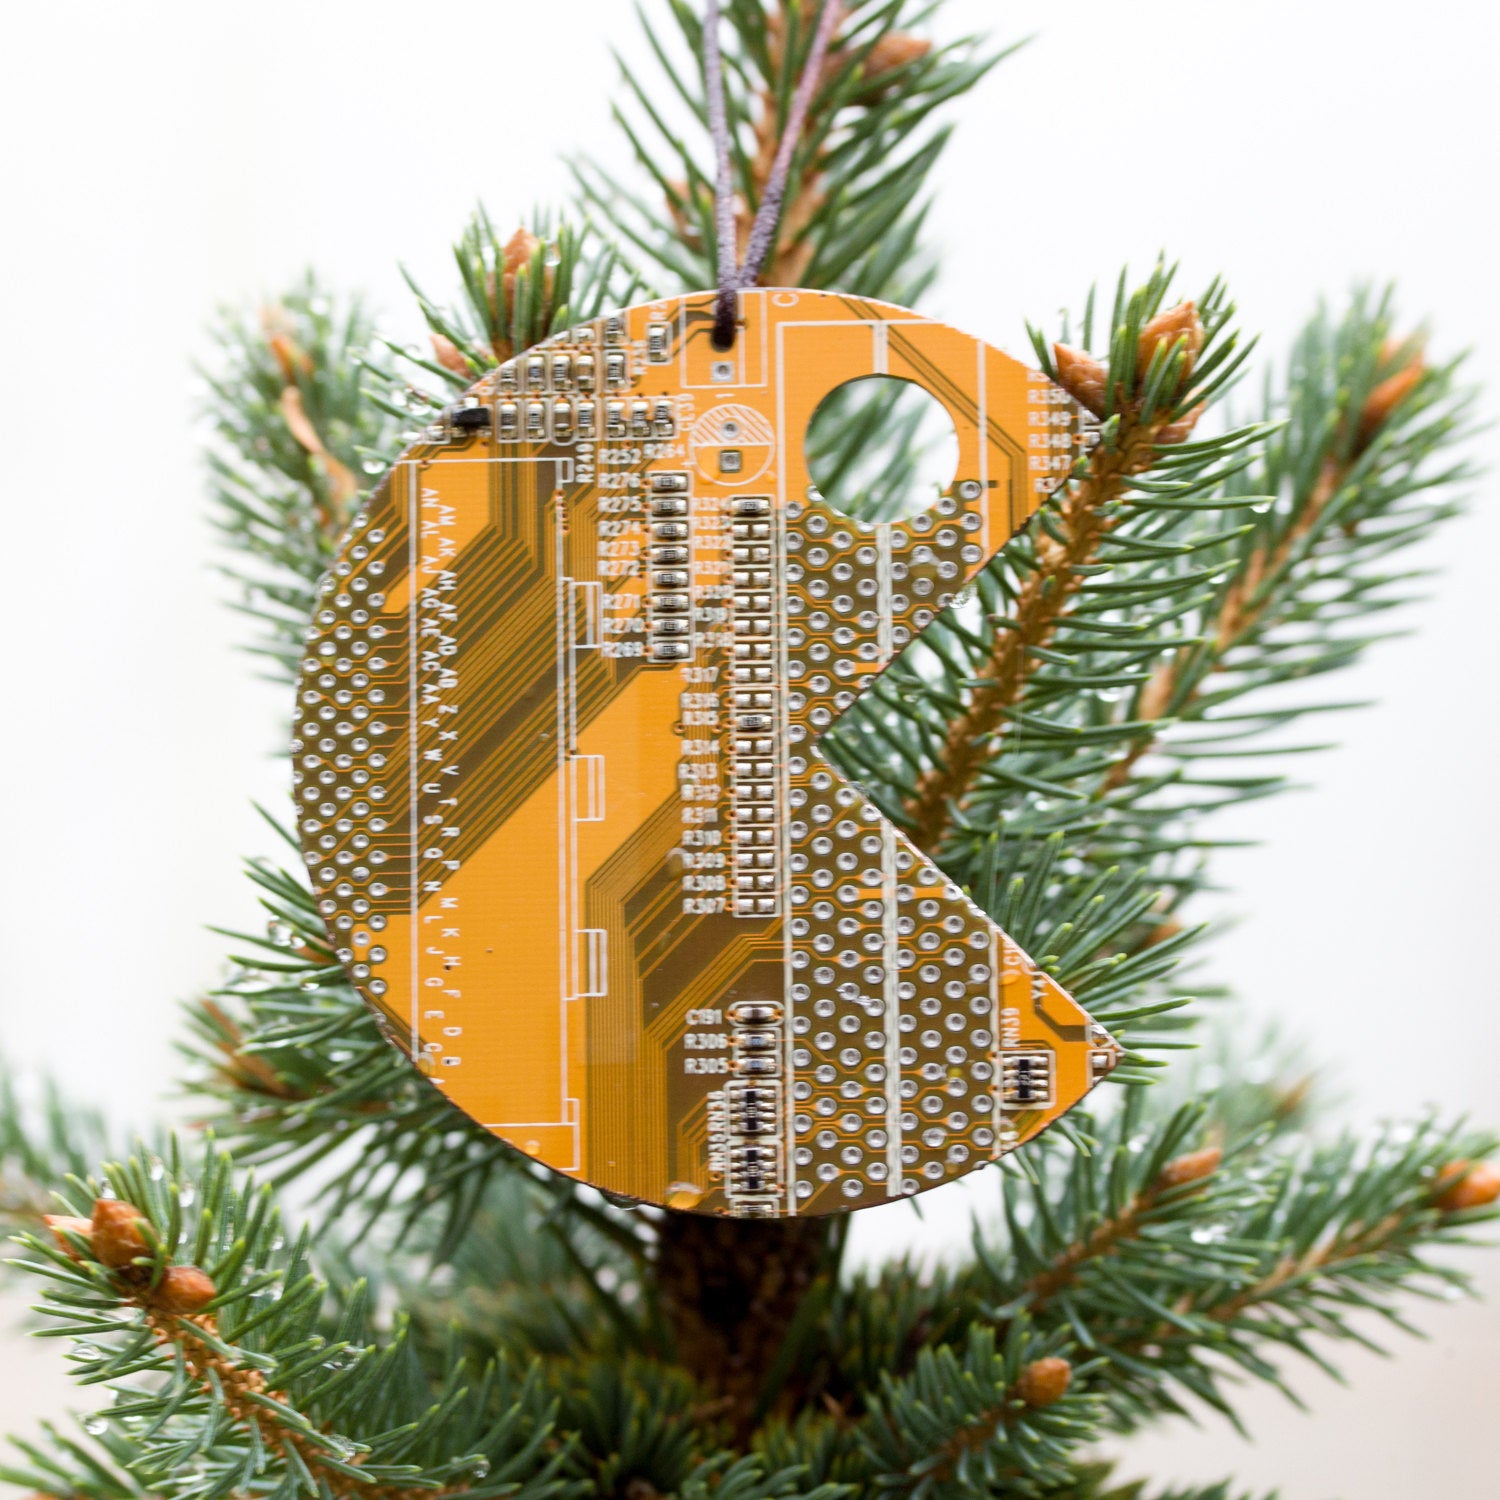 Christmas ornament inspired by videogame